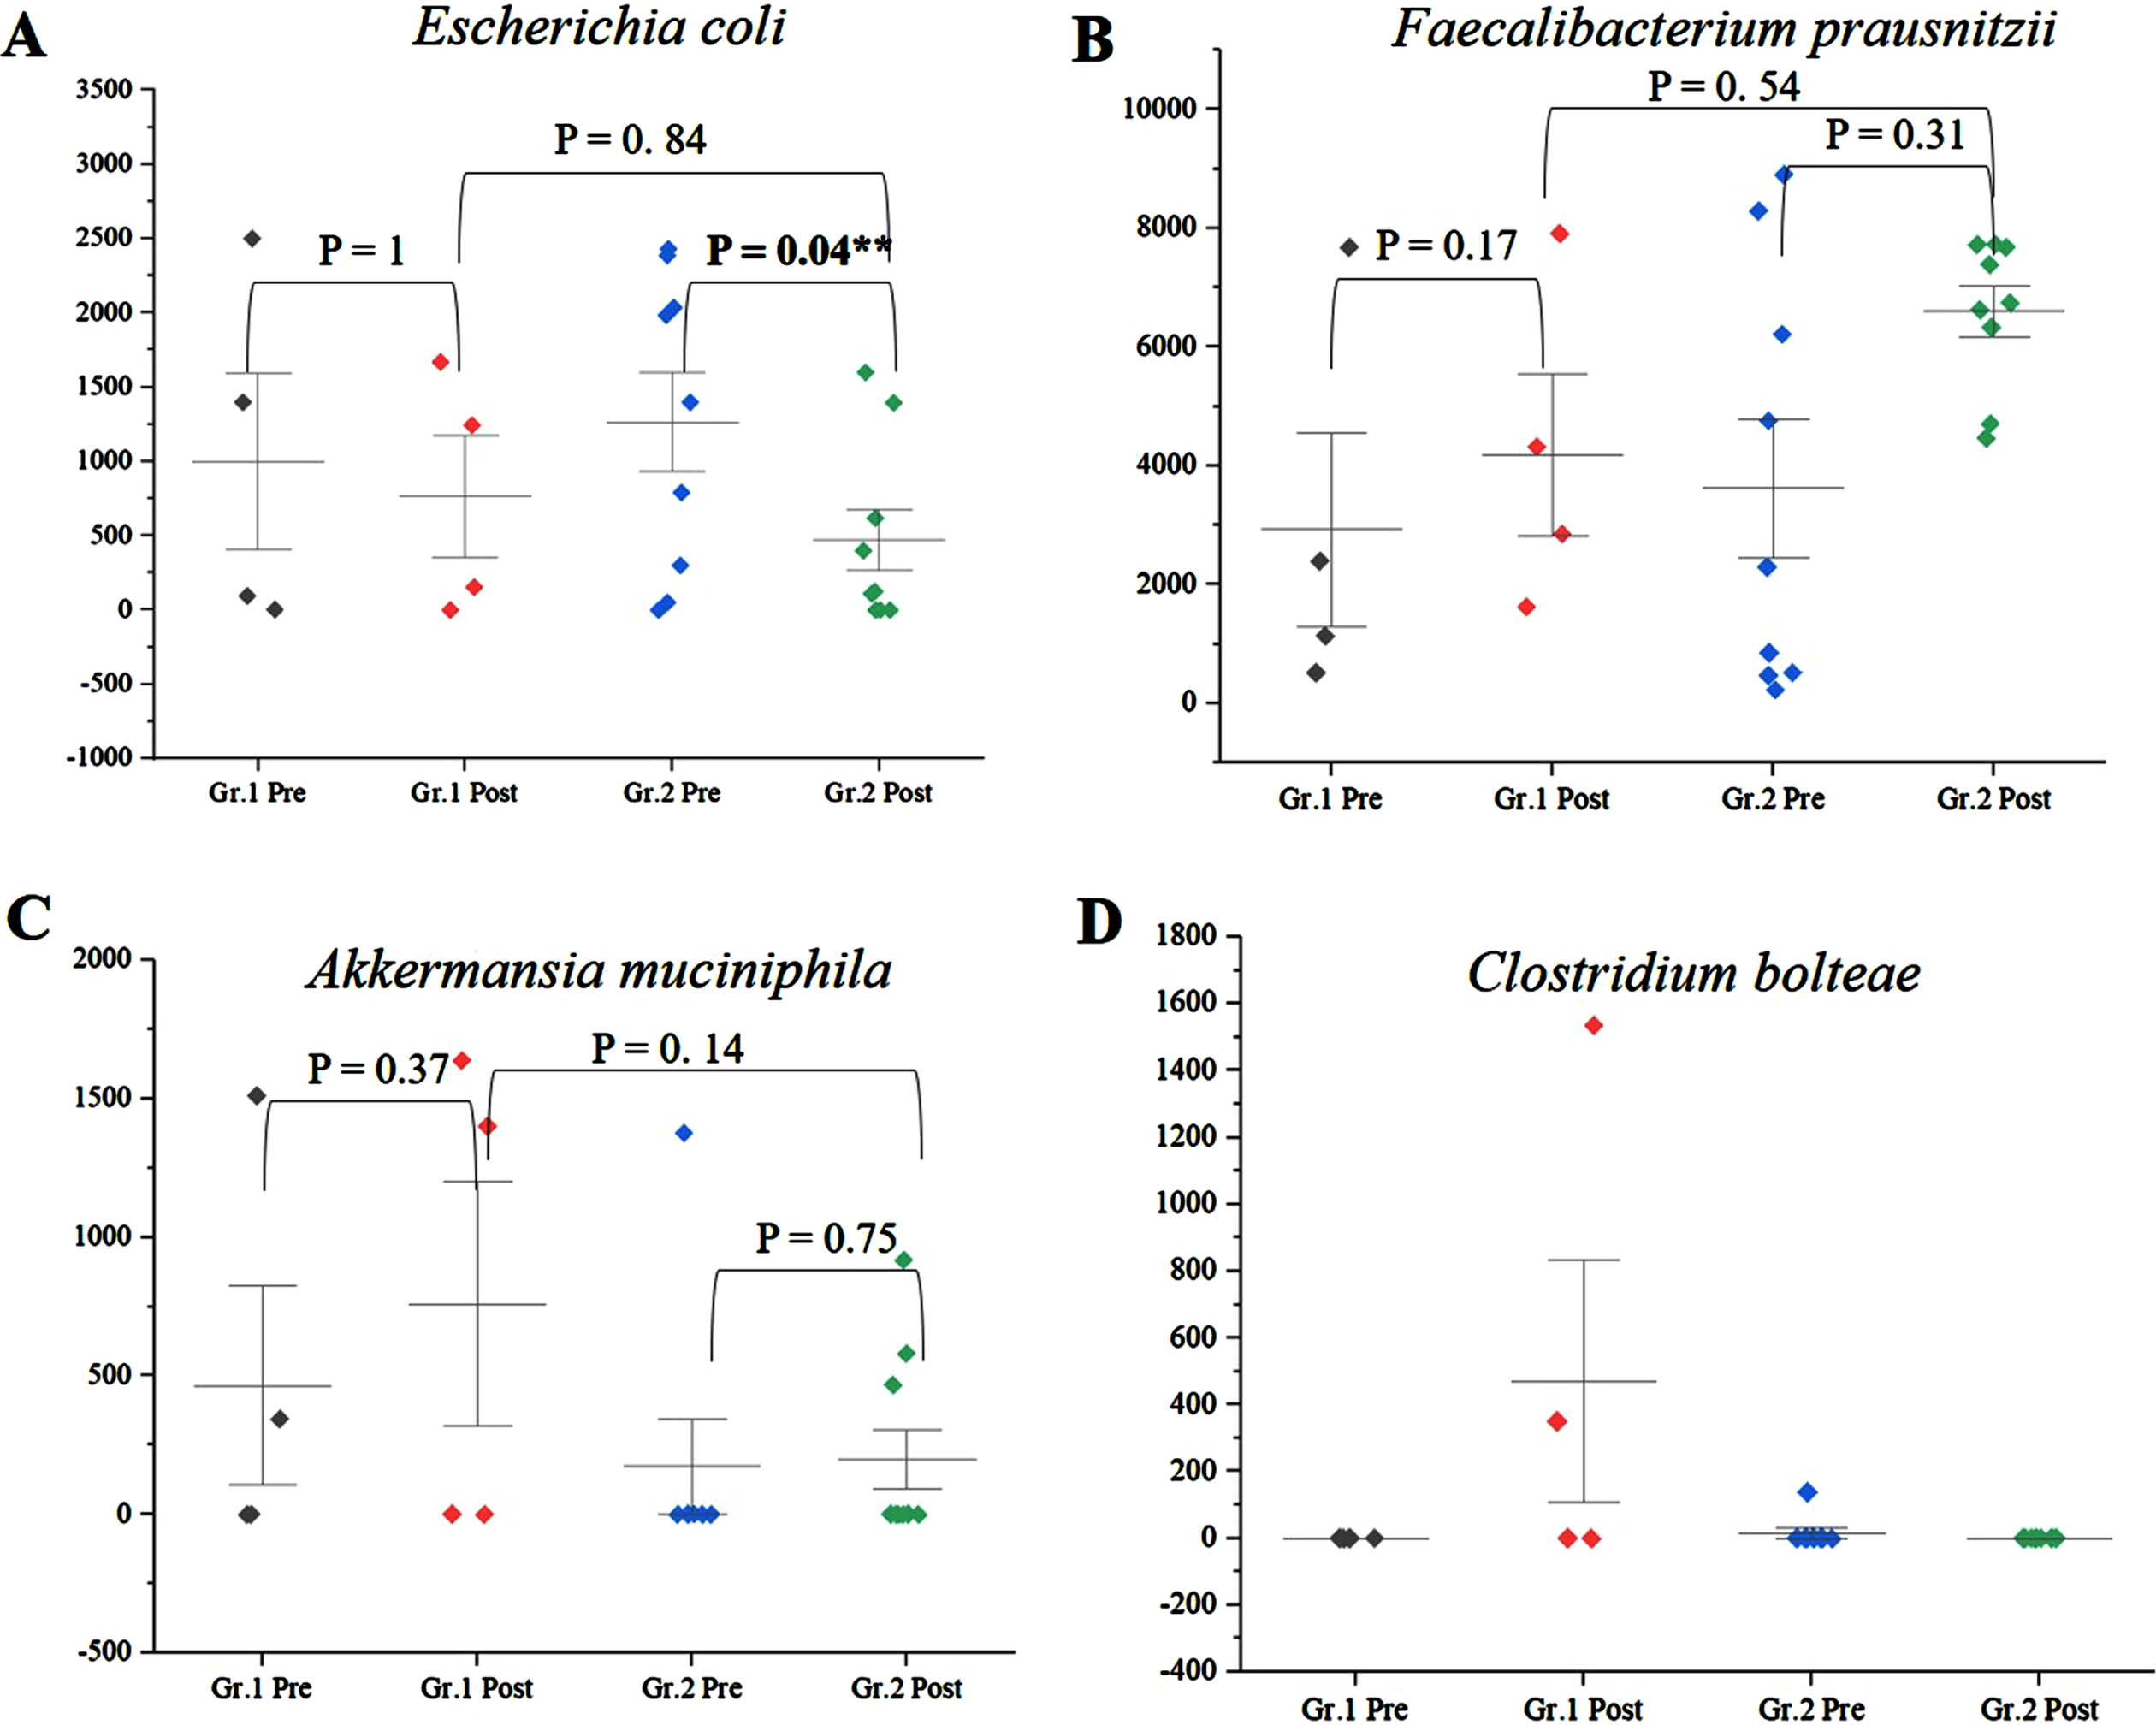 A) Significant decrease in abundance of E. coli in Group (Gr.) 2 compared to Group (Gr.) 1 (p = 0.04). B) Increase in abundance of Faecalibacterium prausnitzii in Gr. 2 compared to Gr. 1 (p = 0.54). C) Increase in Akkermansia muciniphila in Gr. 1 but decrease in Gr. 2 postintervention. D) Increase in Clostridium bolteae CAG:59 in Gr. 1 but decrease in Gr. 2 postintervention. **significance p < 0.05